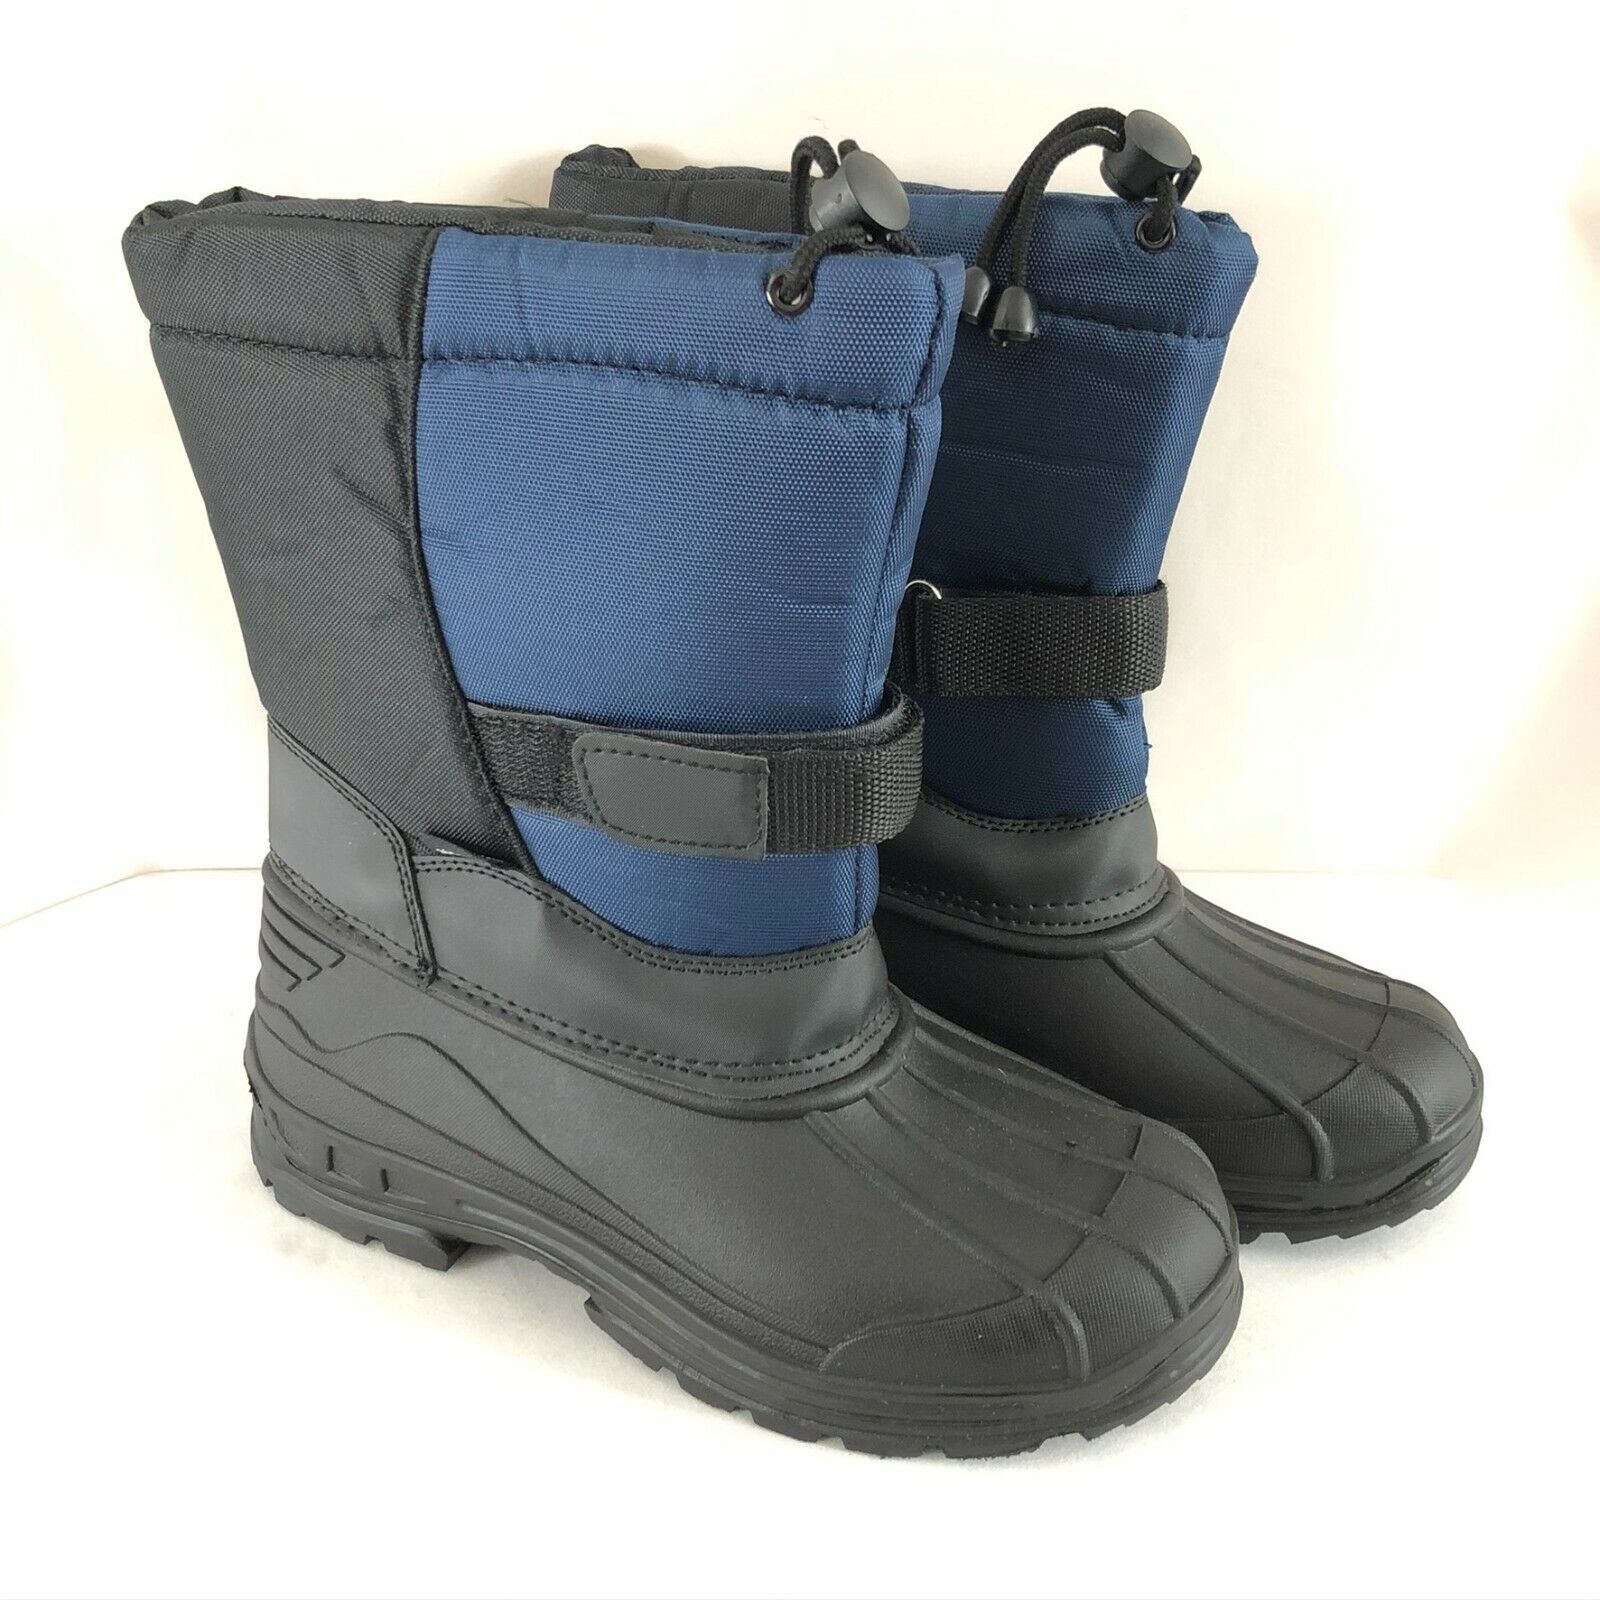 Primary image for Skadoo Womens Winter Snow Boots Sherpa Lined Navy Blue Black Size 6